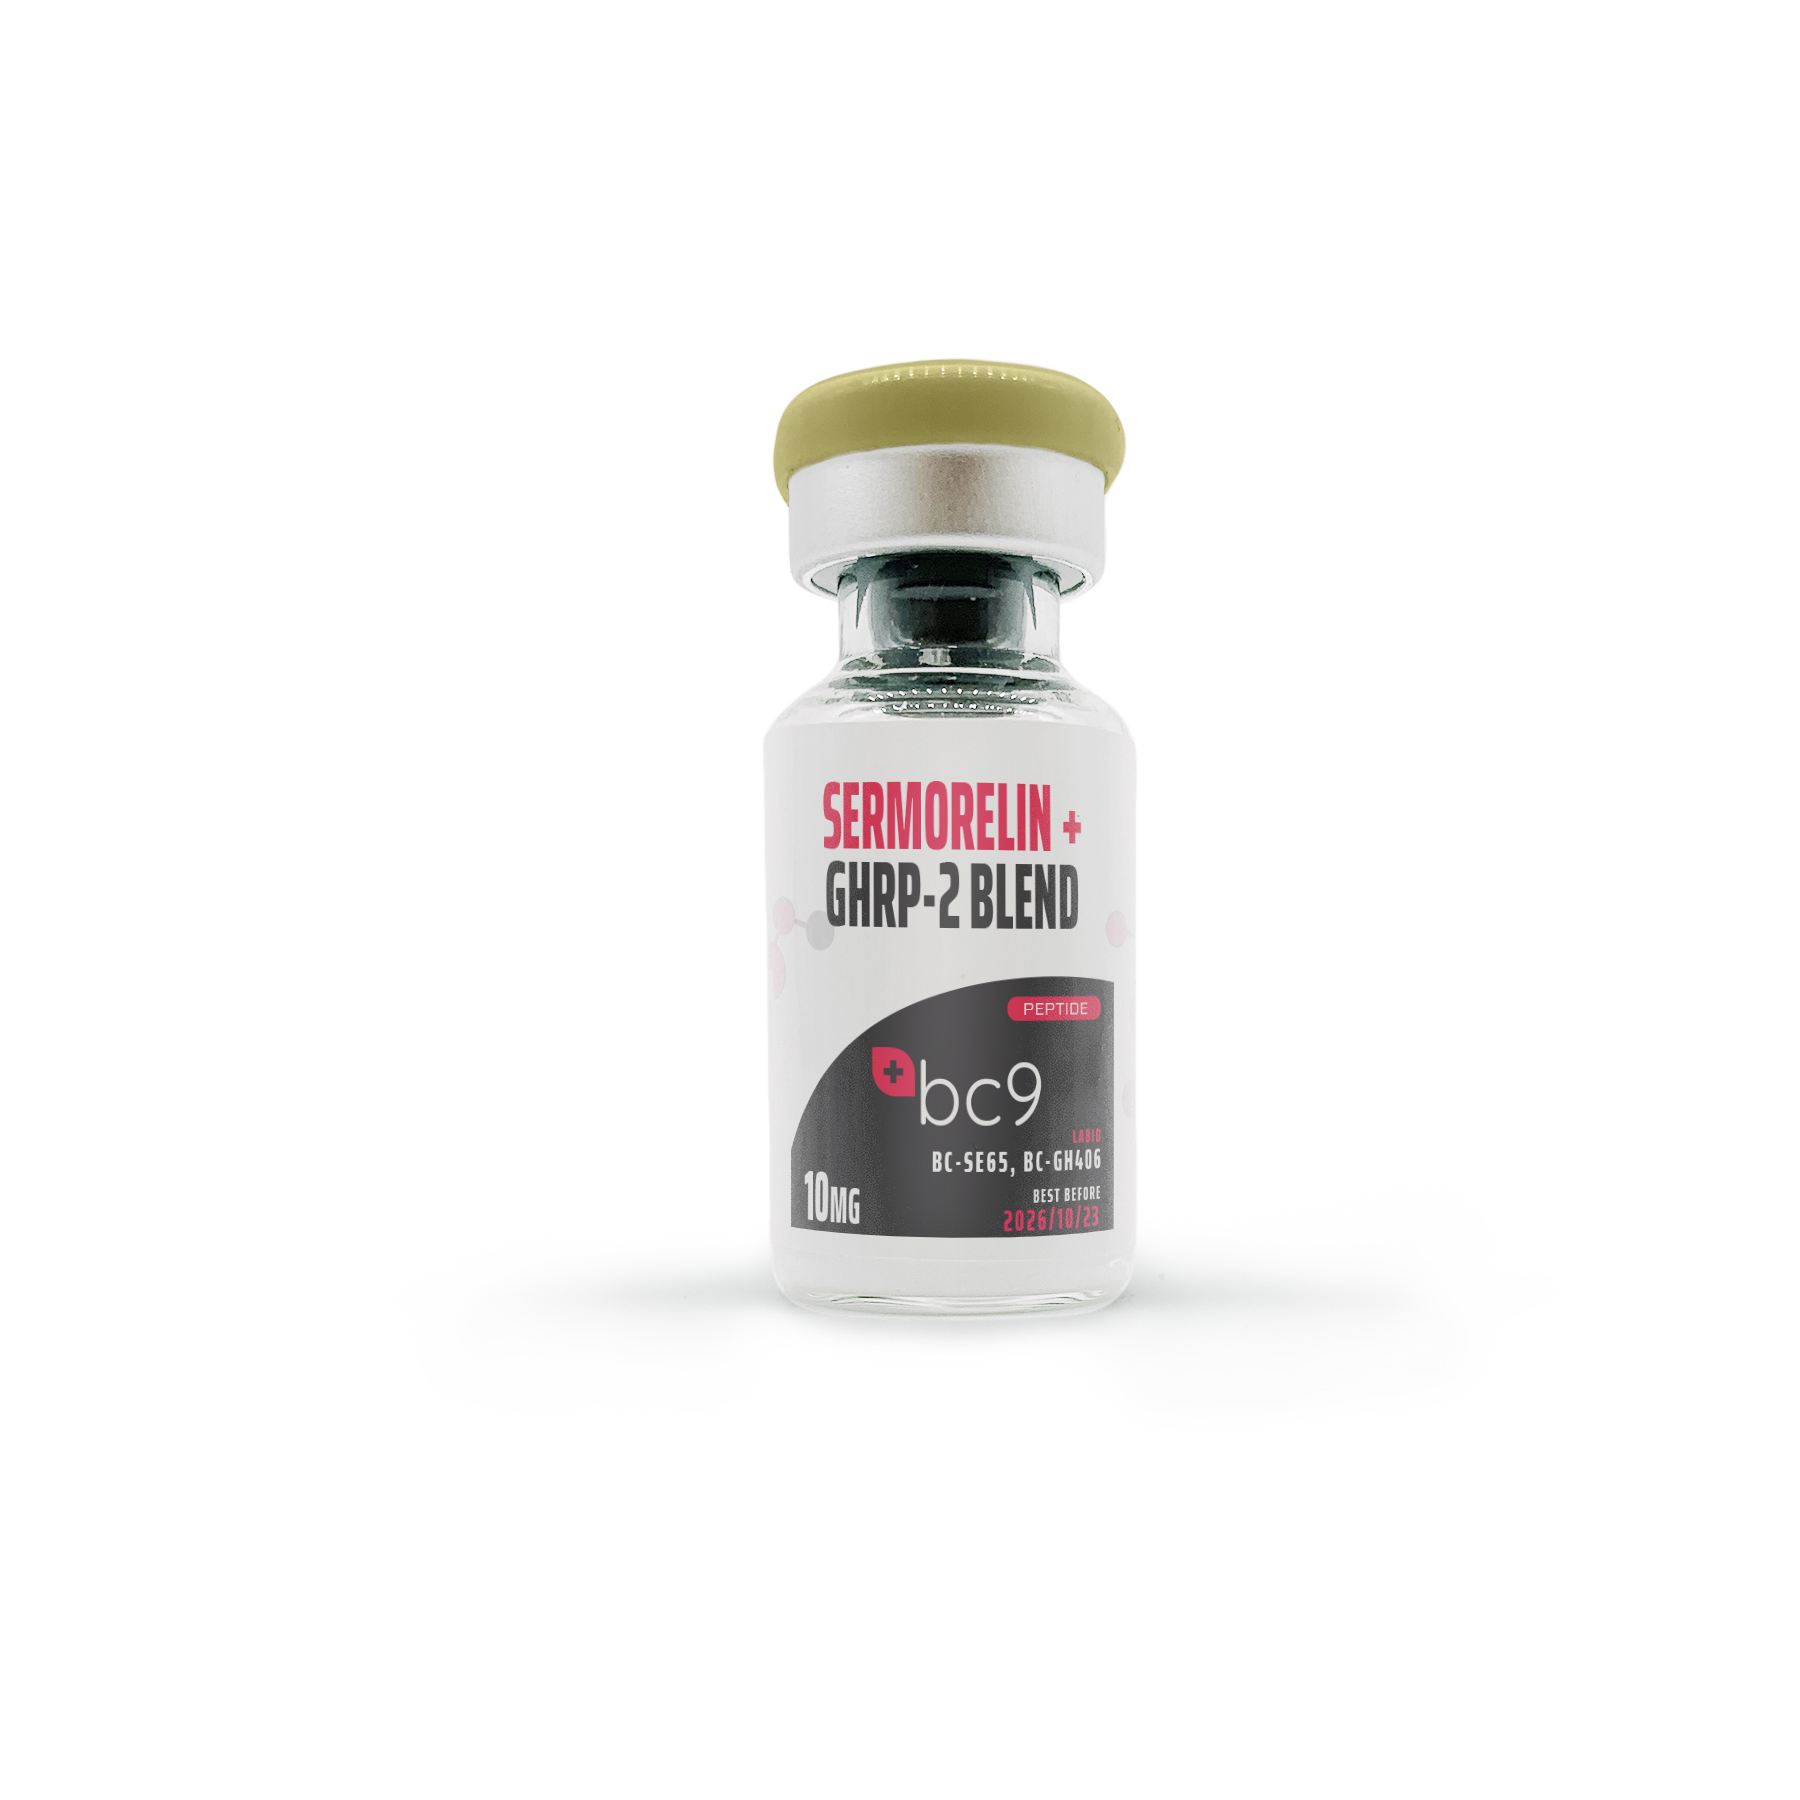 Sermorelin + GHRP-2 Blend For Sale | Fast Shipping | BC9.org